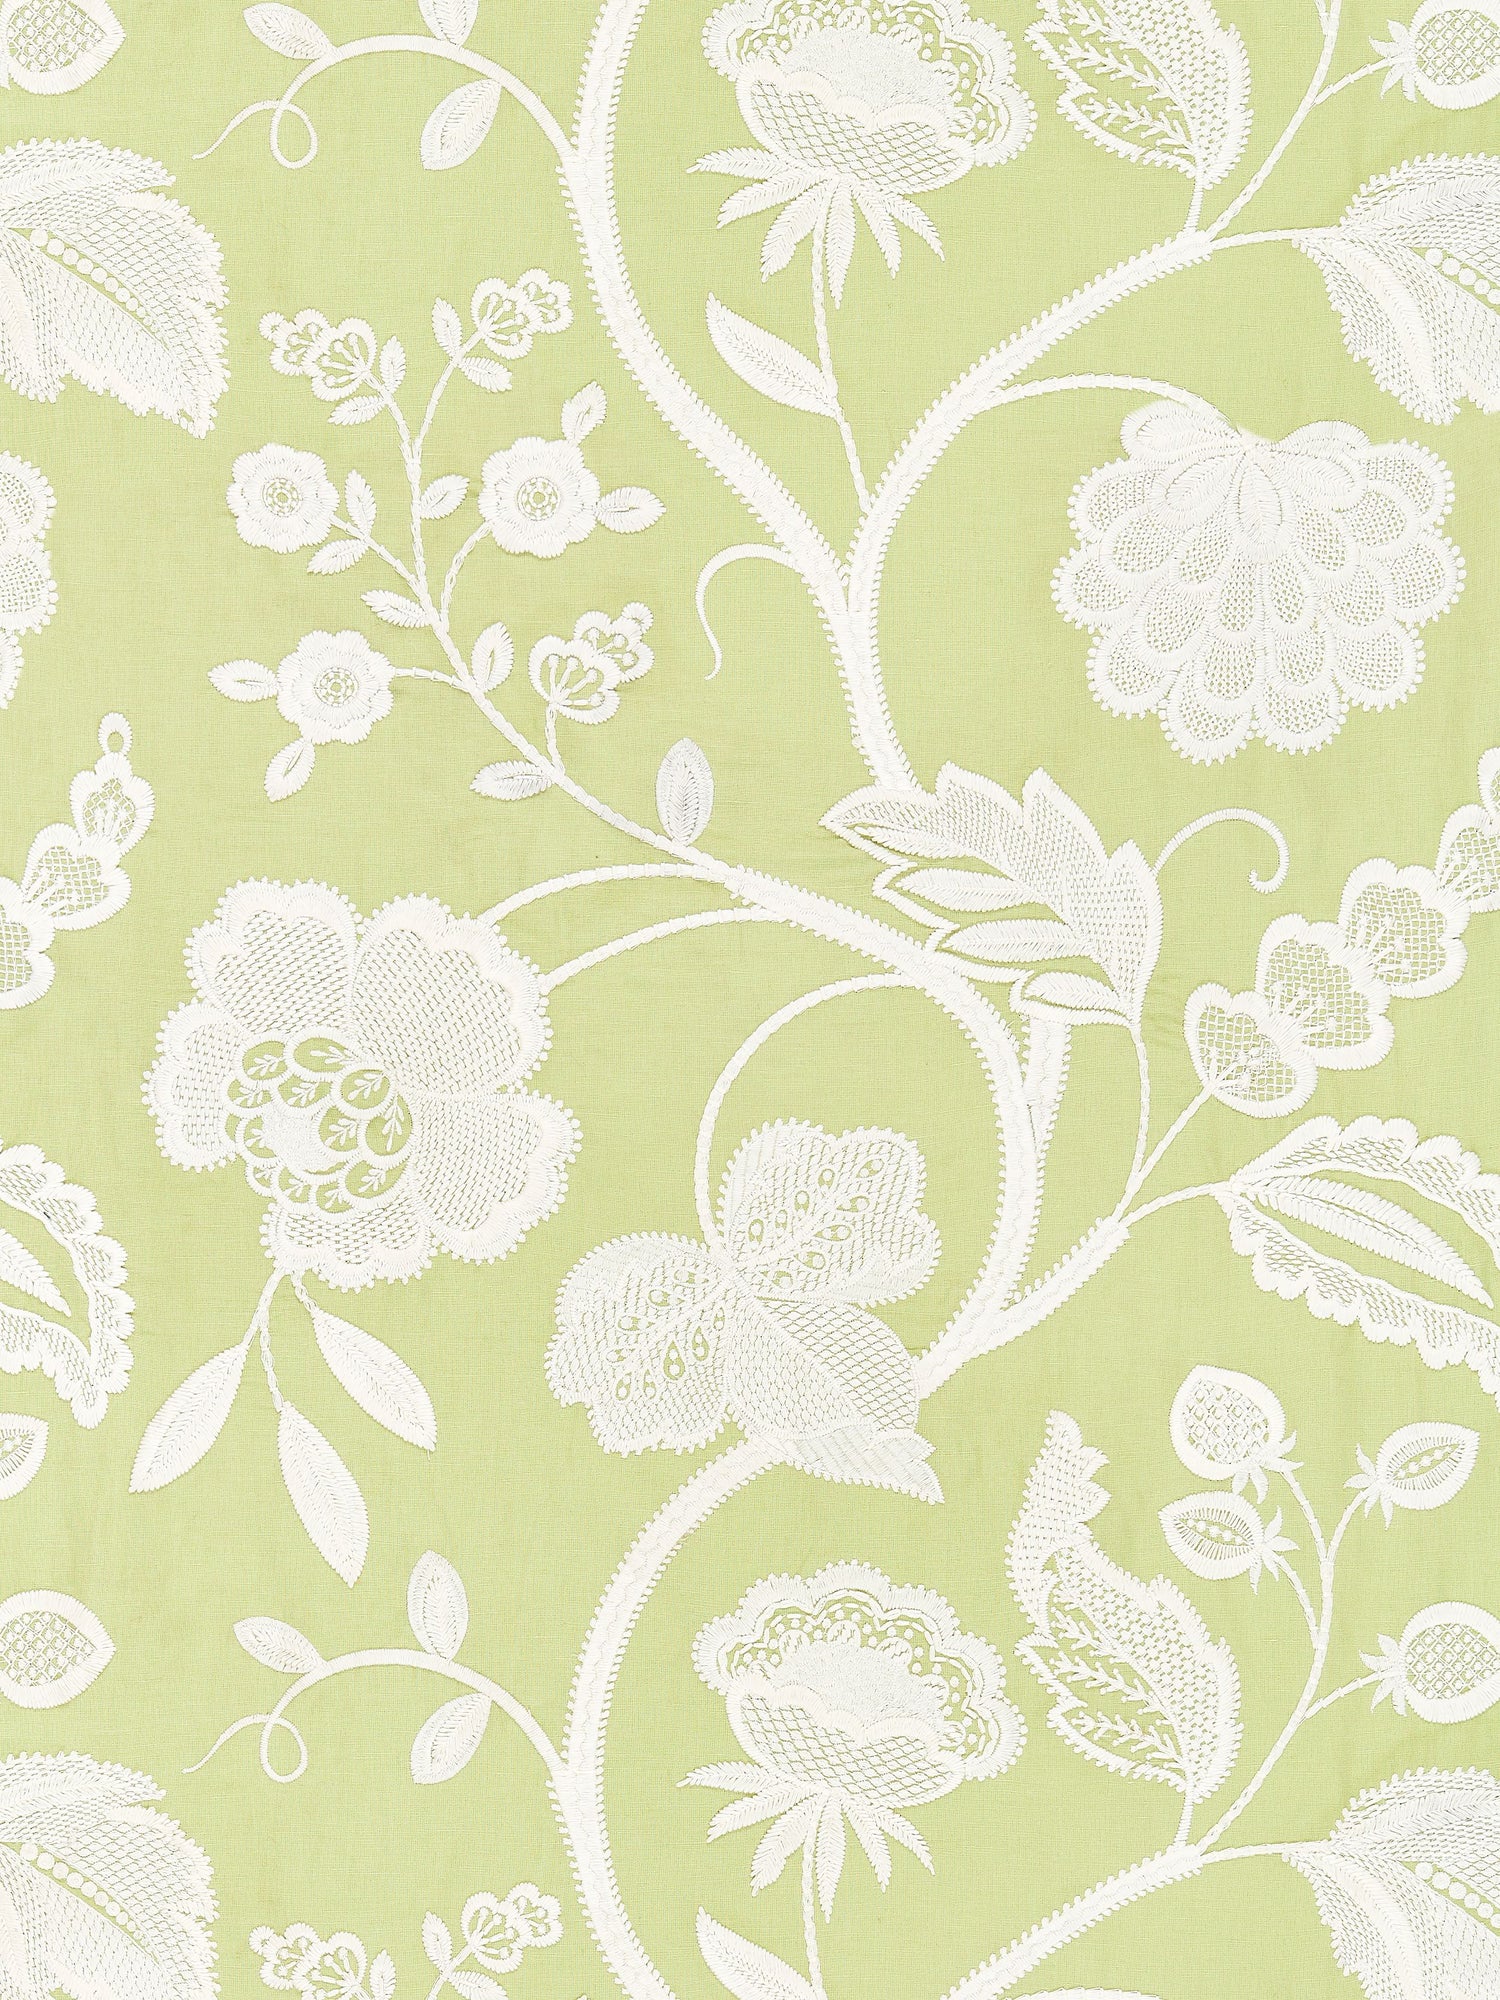 Kensington Embroidery fabric in celery color - pattern number SC 000227151 - by Scalamandre in the Scalamandre Fabrics Book 1 collection